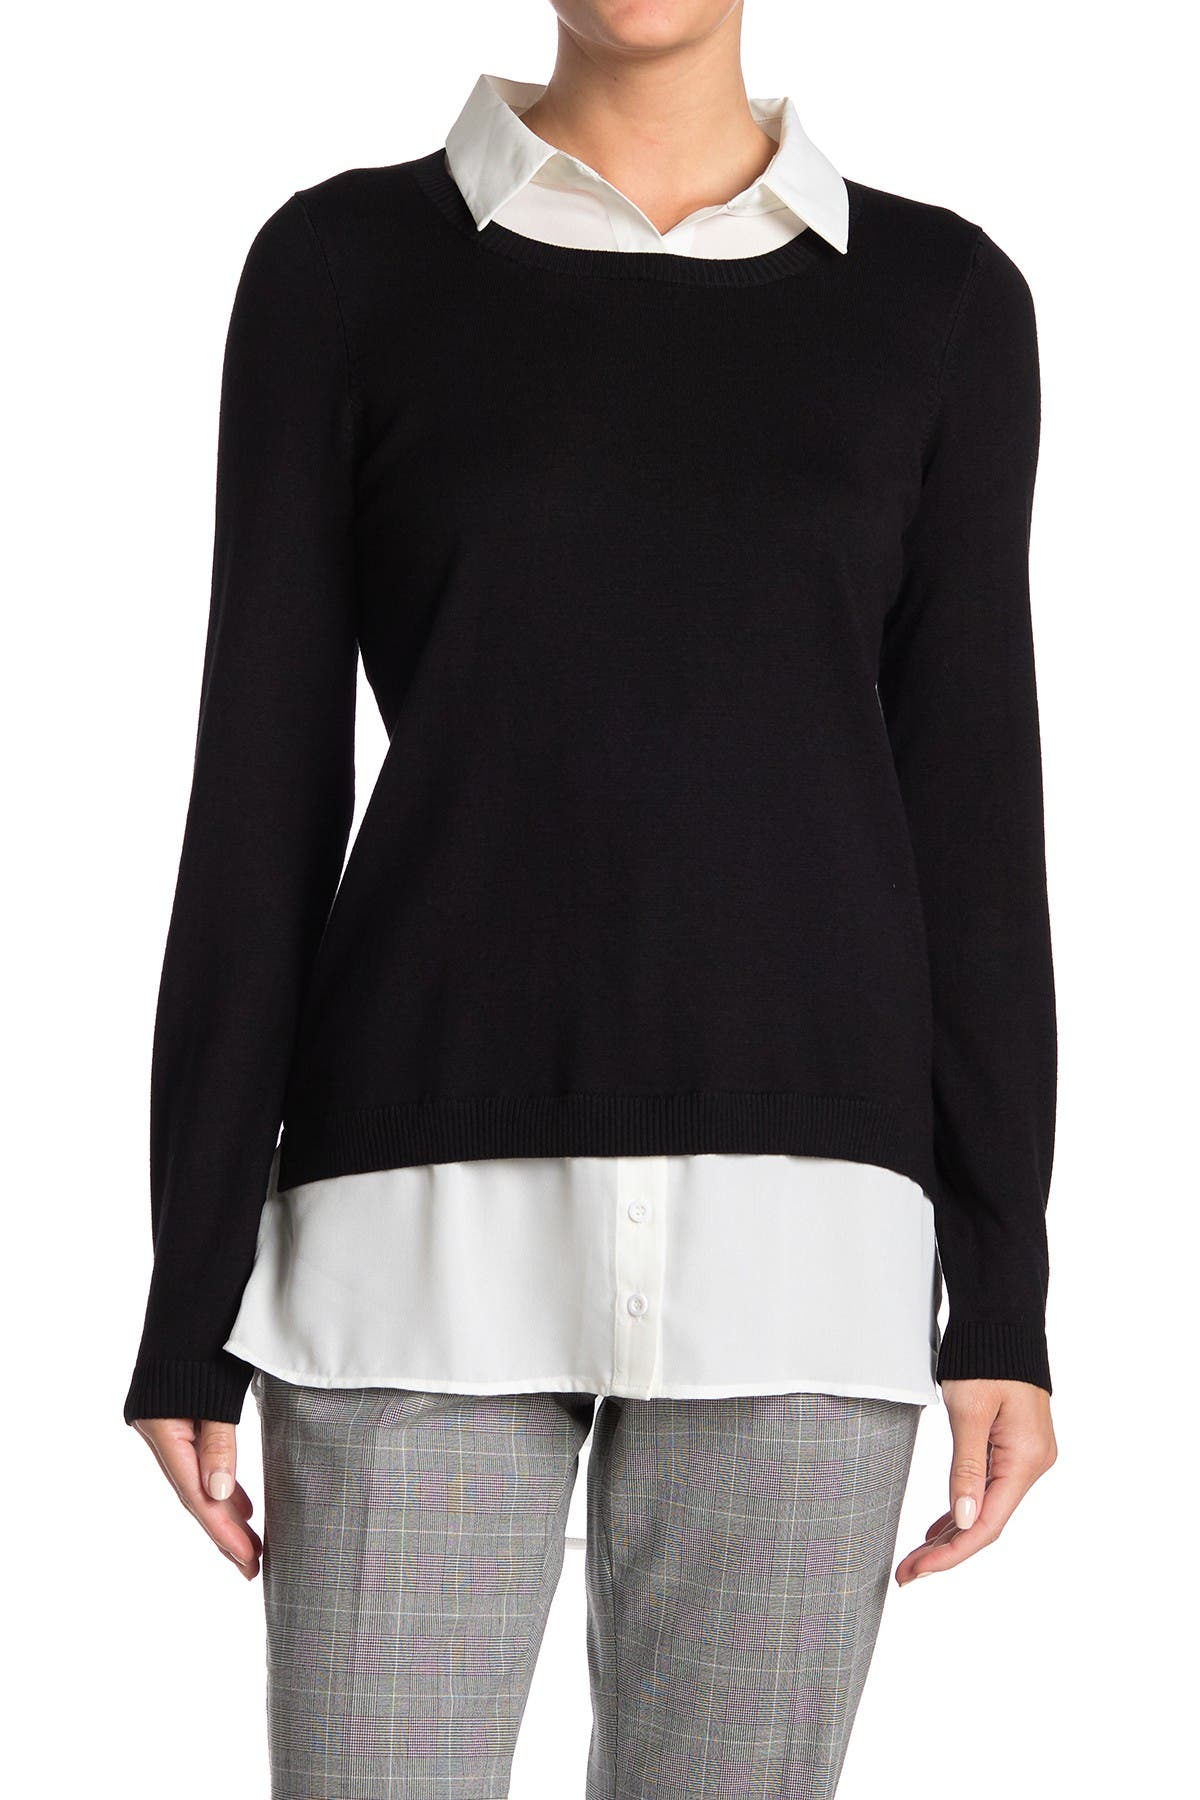 Adrianna Papell | Solid Twofer Sweater | Nordstrom Rack